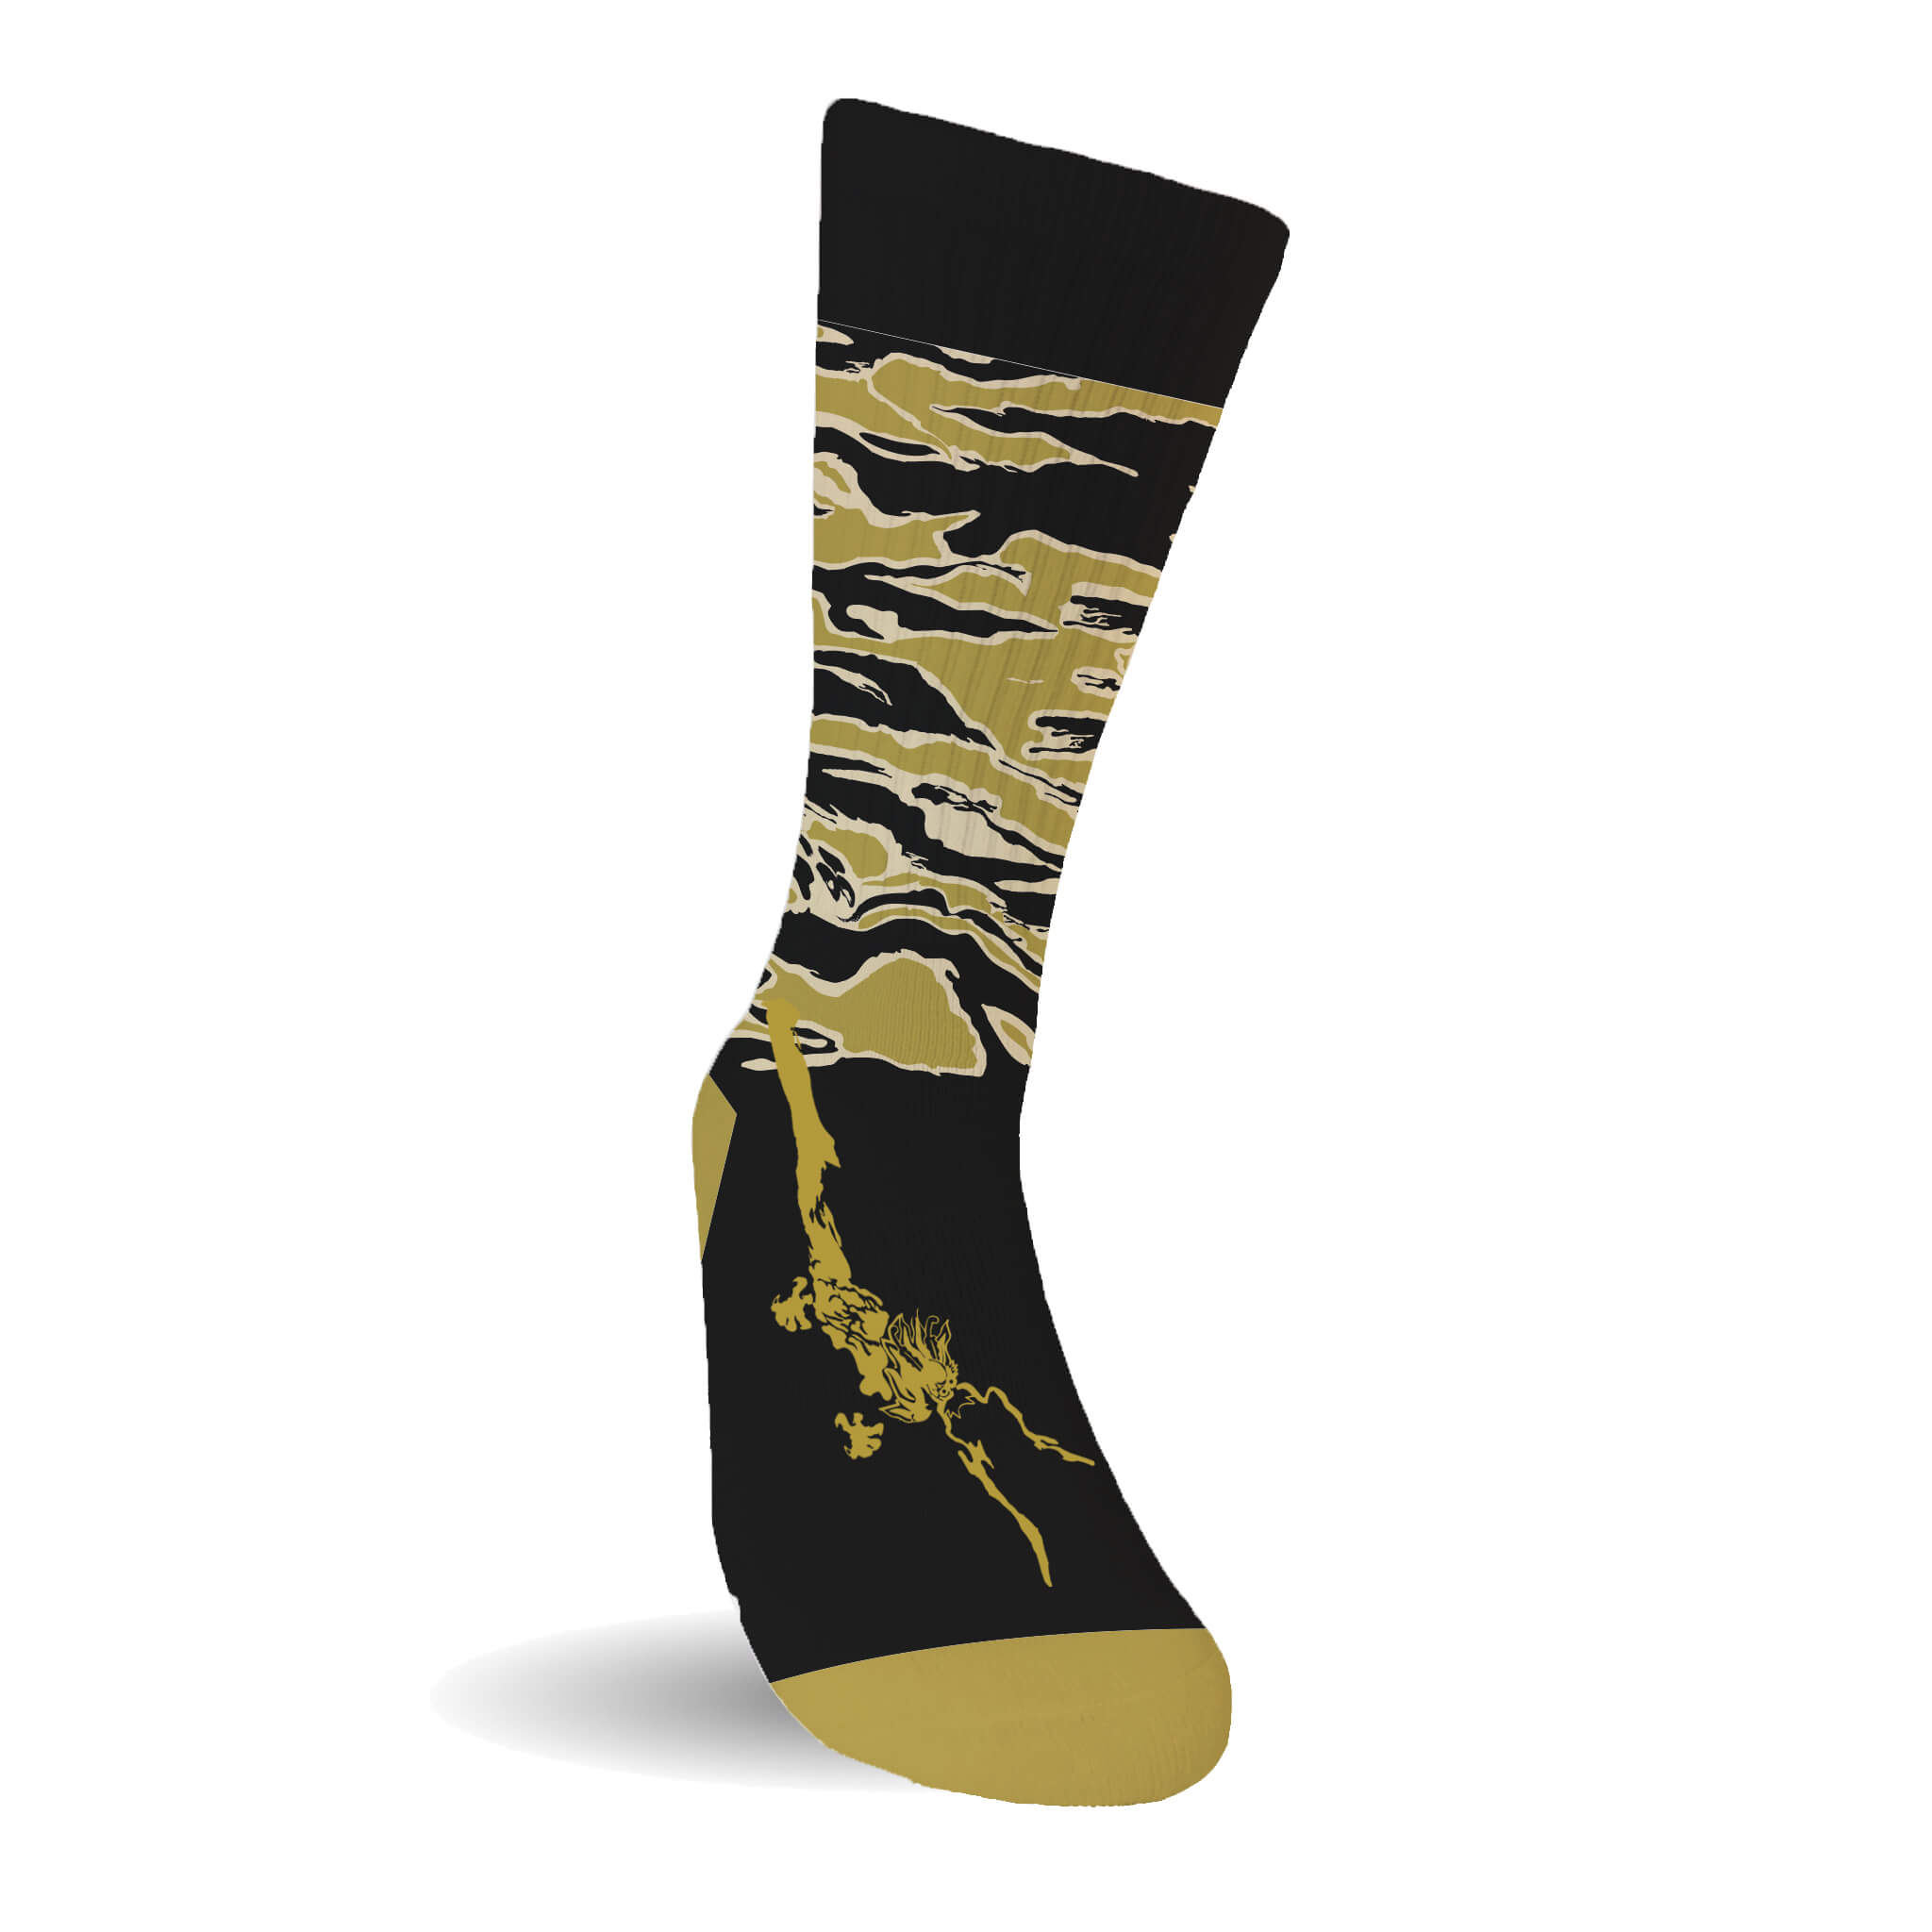 140520_jacquard sock_render_front view